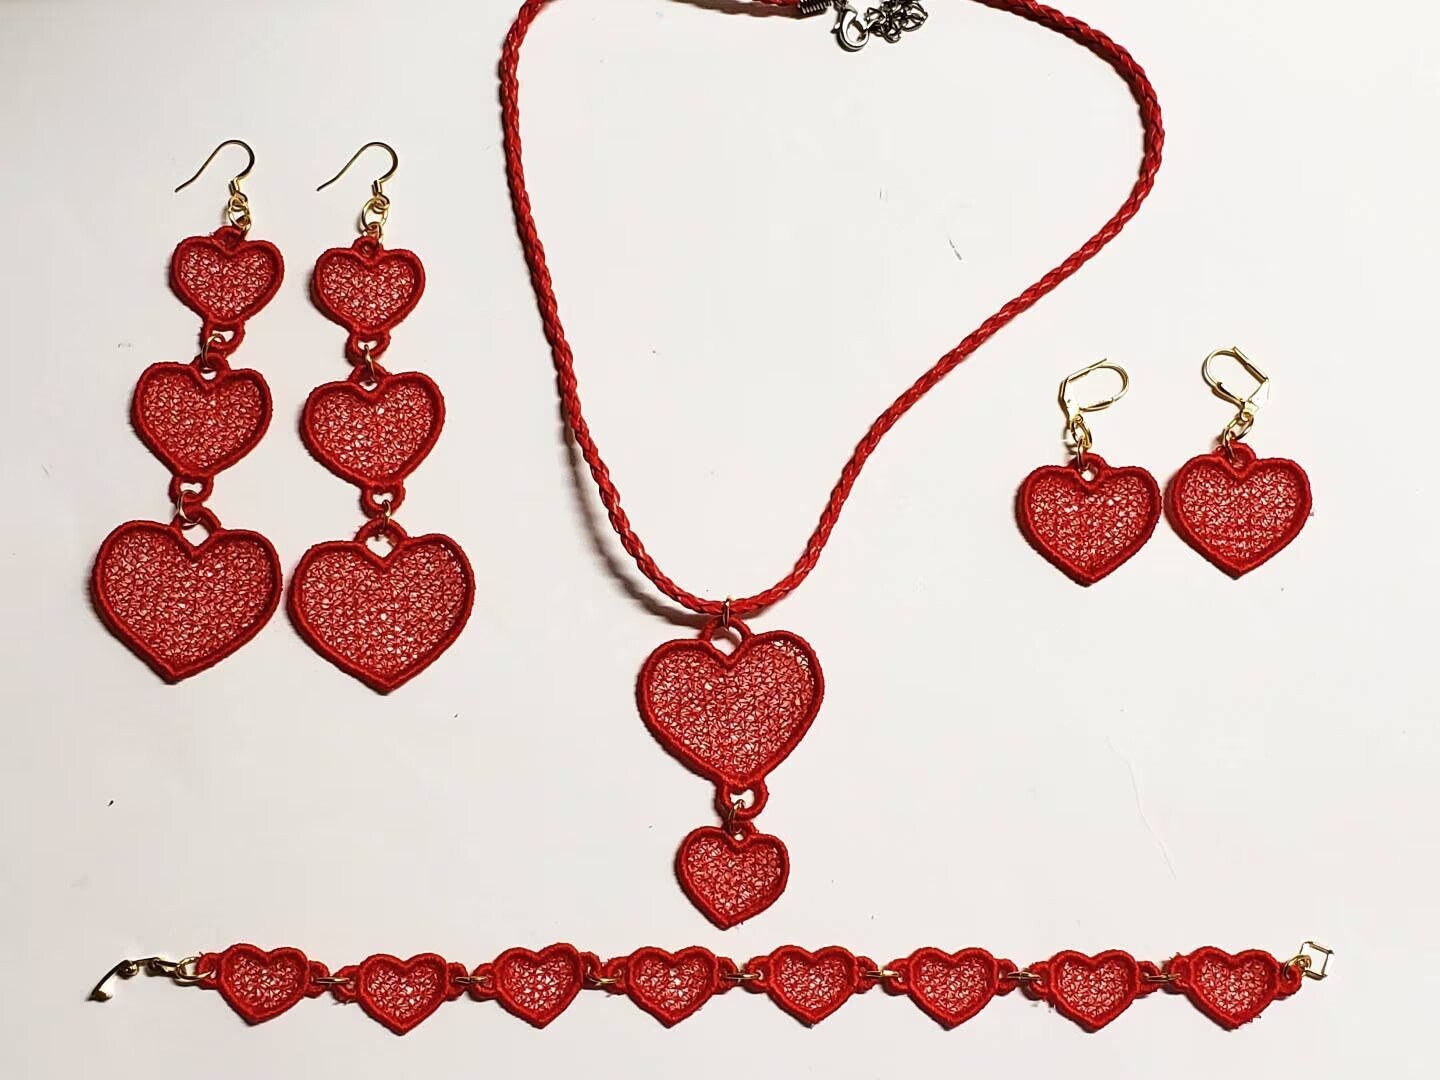 Hearts Freestanding lace machine embroidery design 8 different designs for earrings, pendants, bracelets and charms